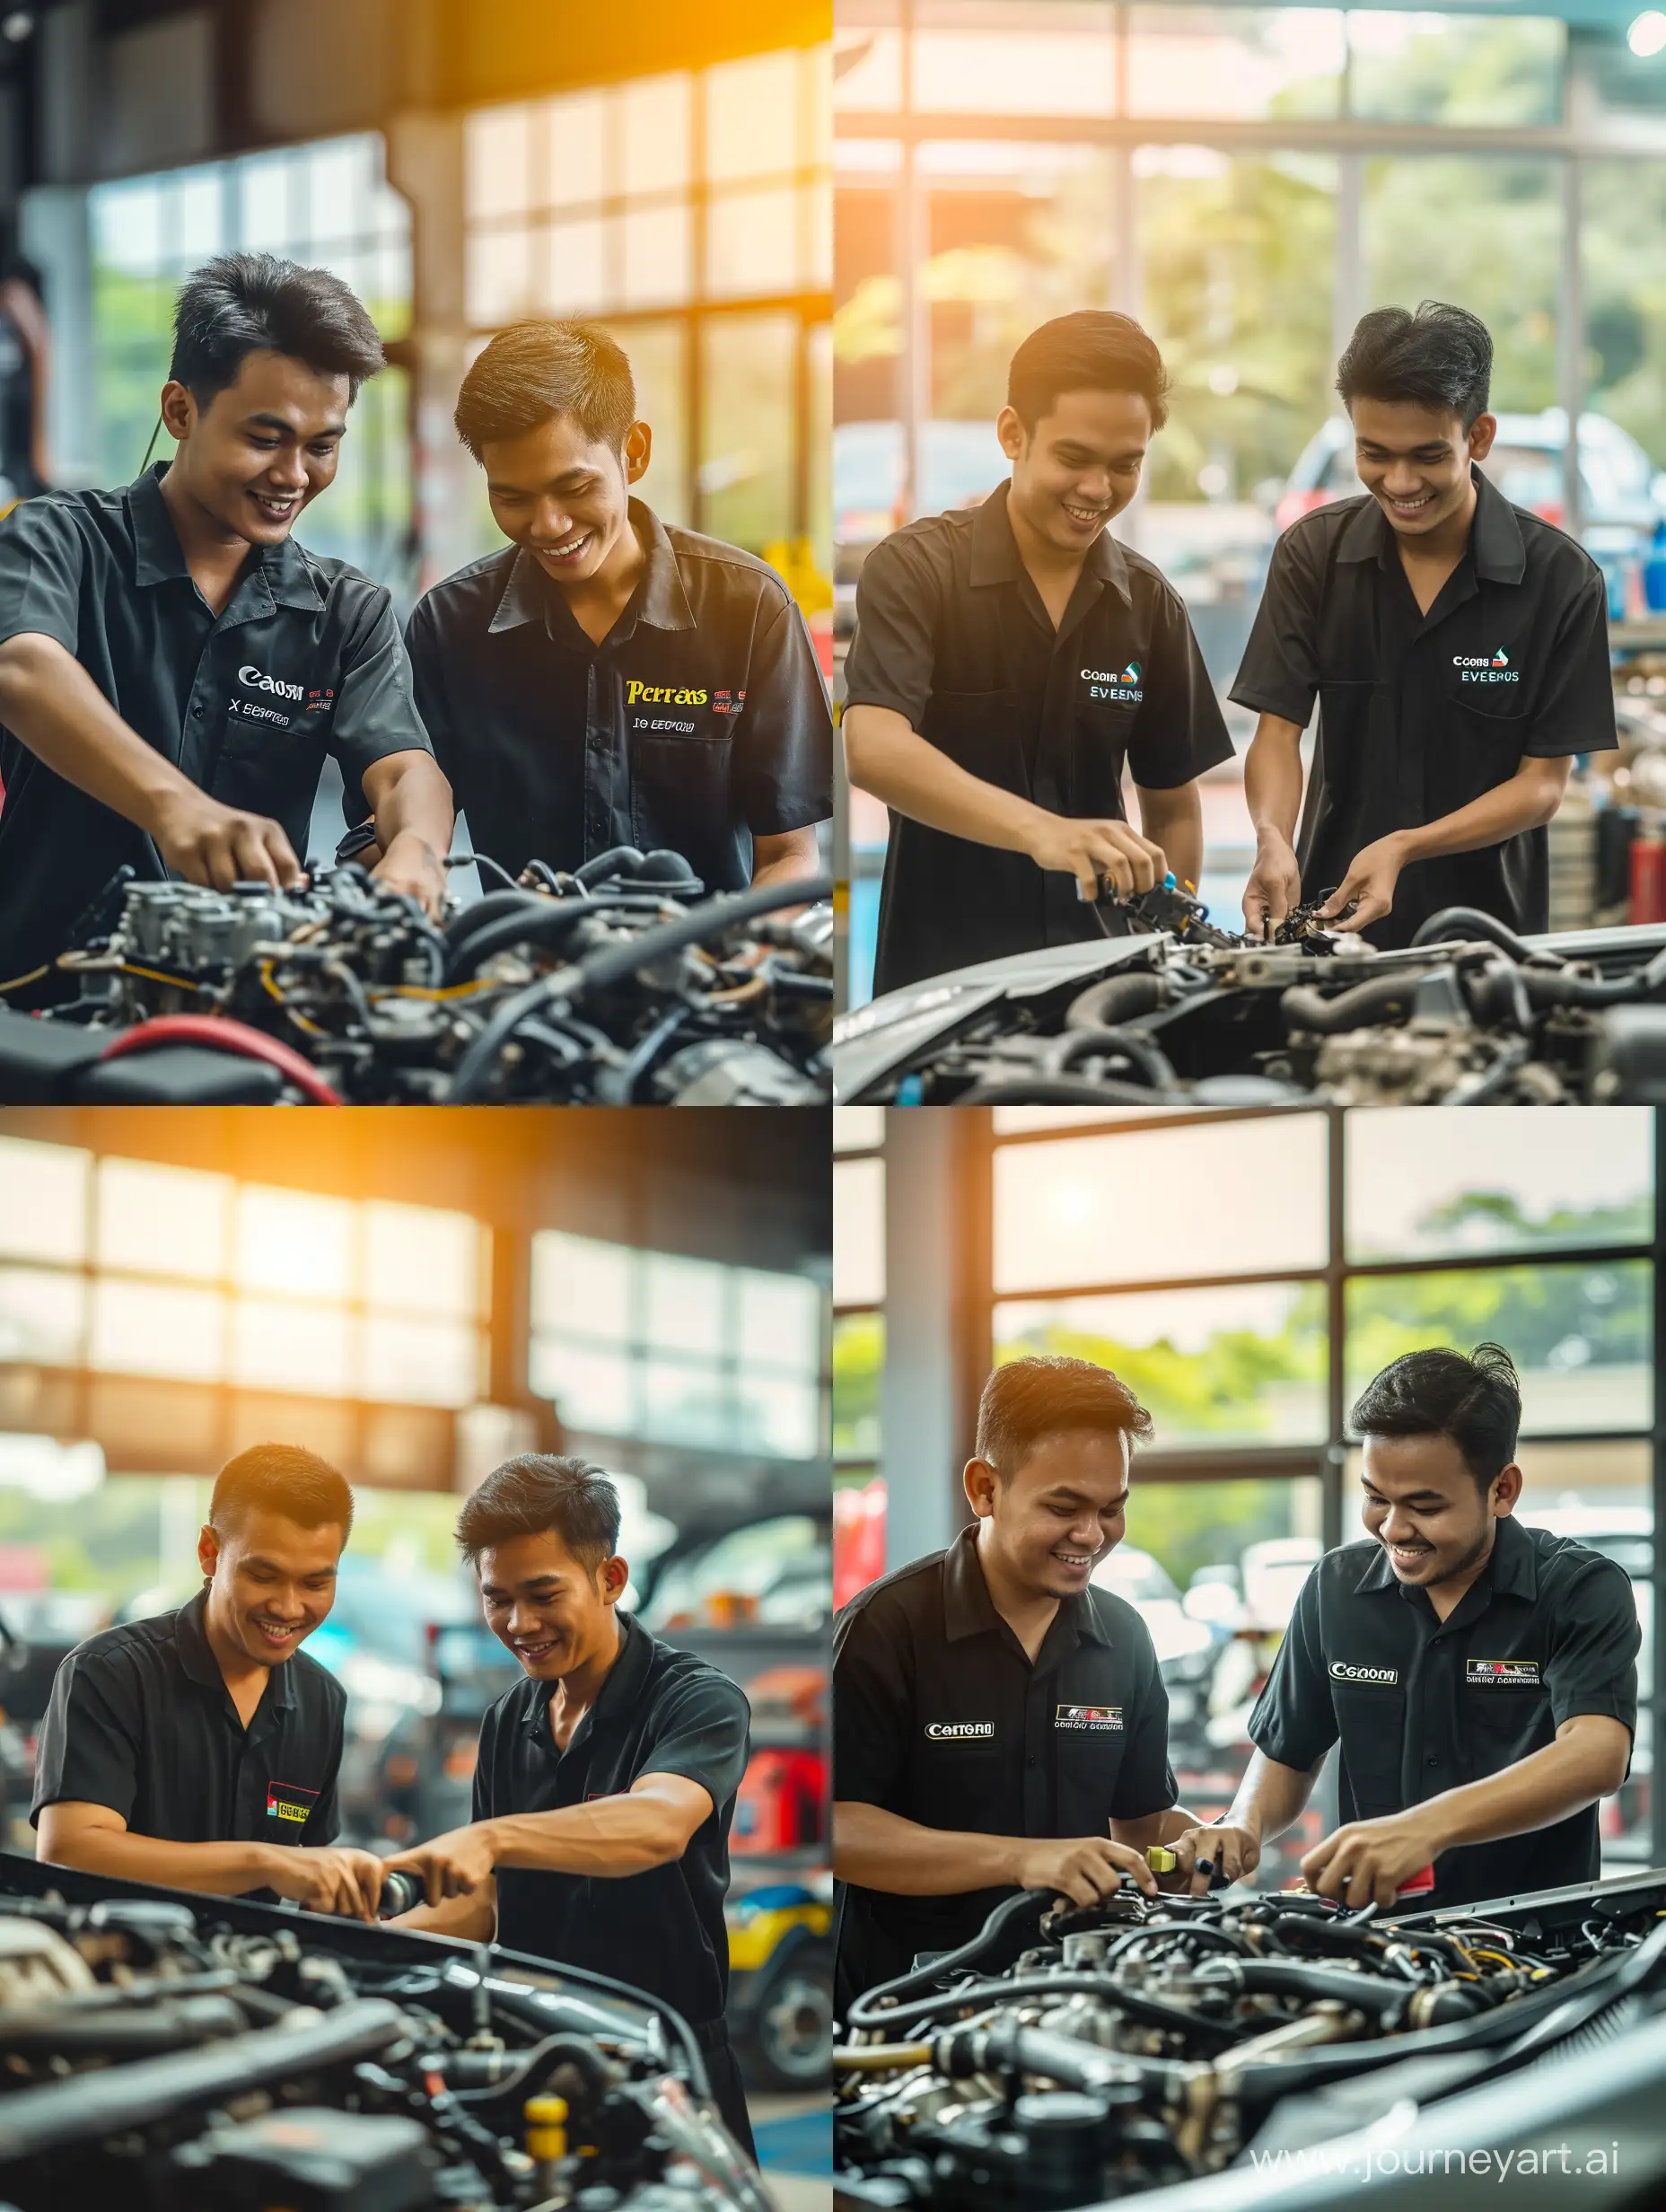 
ultra realistic two male malay mechanics wearing black shirts. Petronas Auto Expert is written on the shirt. they are checking the car engine while smiling welcoming the customer. modern workshop background. there is refraction of morning sunlight. canon eos-id x mark iii dslr --v 6.0